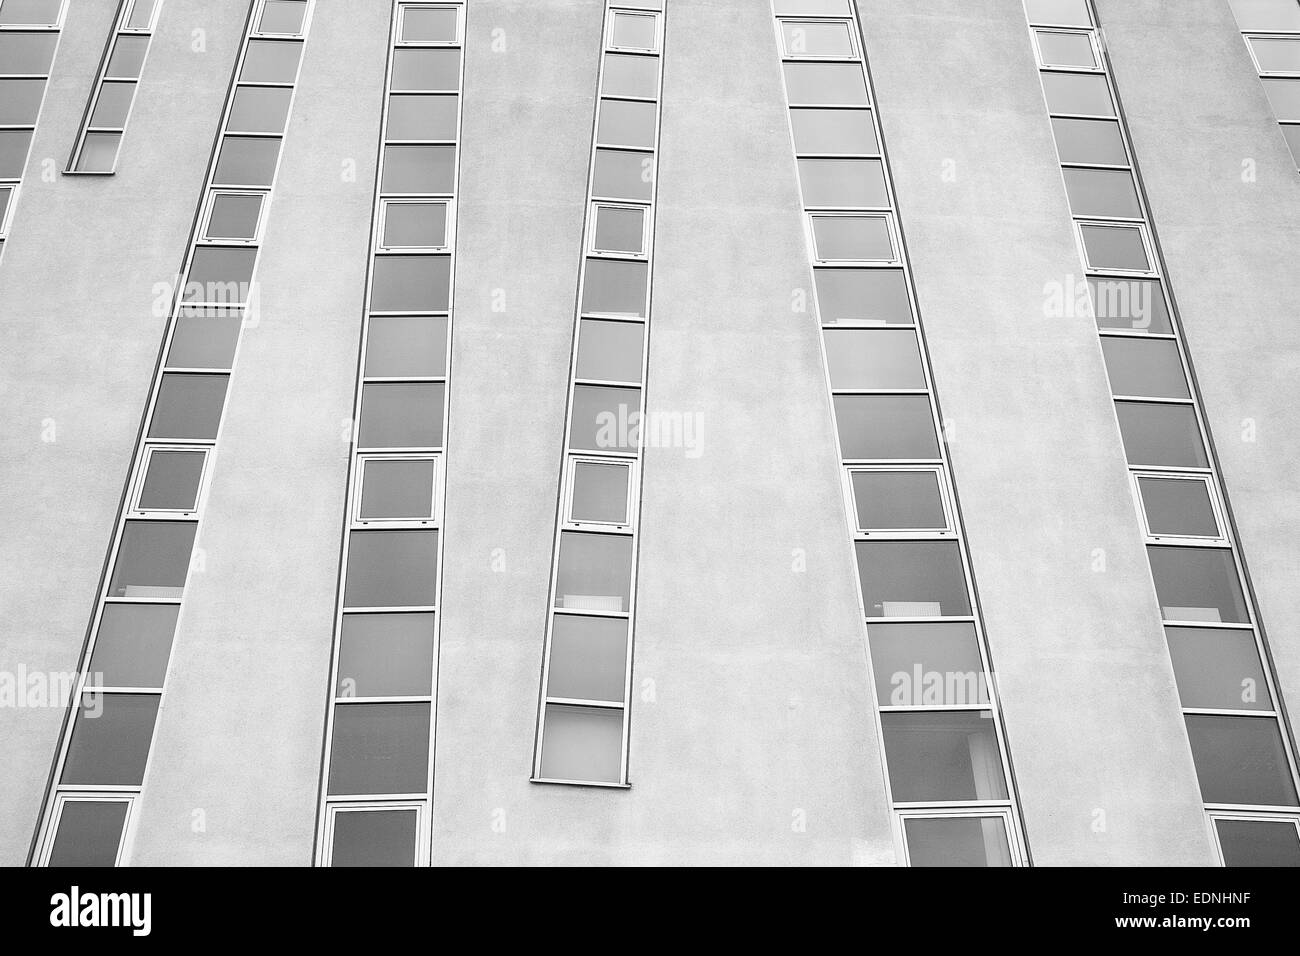 Abstract architecture in black and white Stock Photo